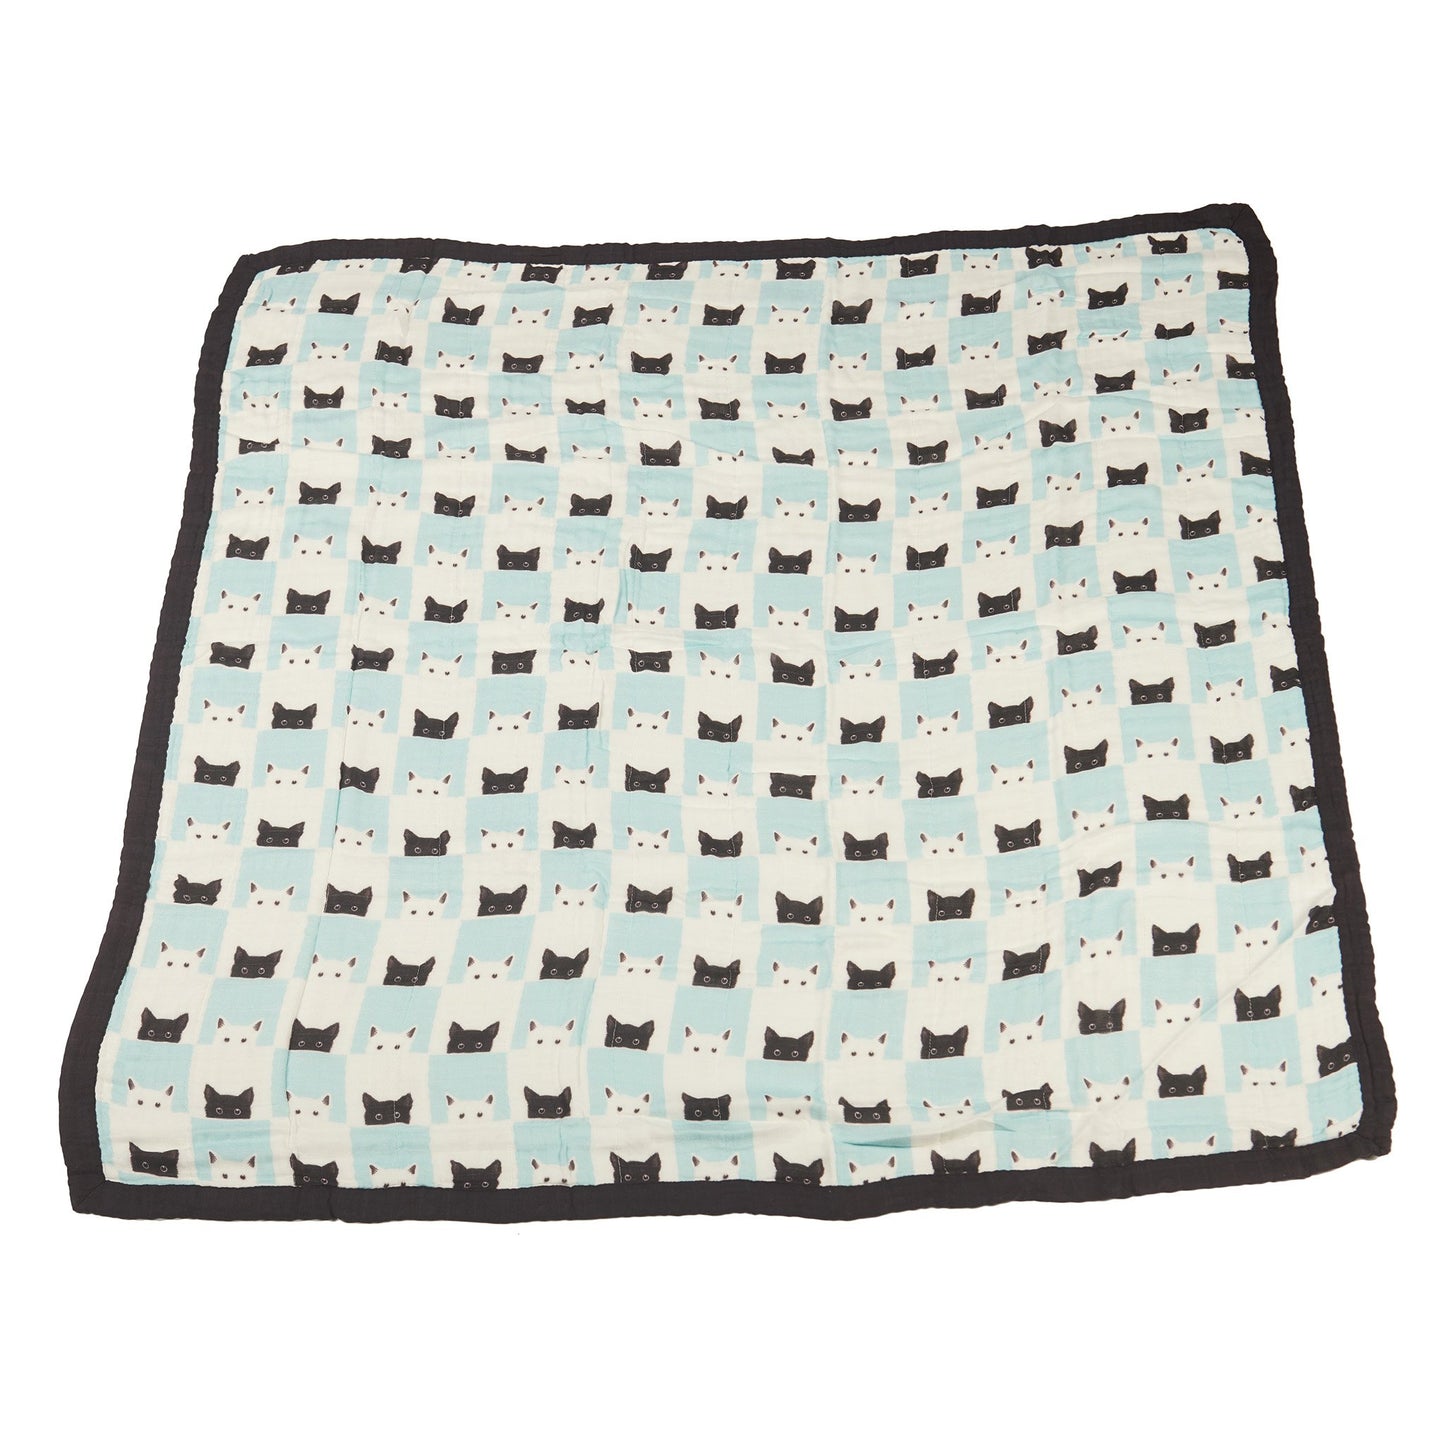 Peek-A-Boo Cats and Pencil Stripe Blanket